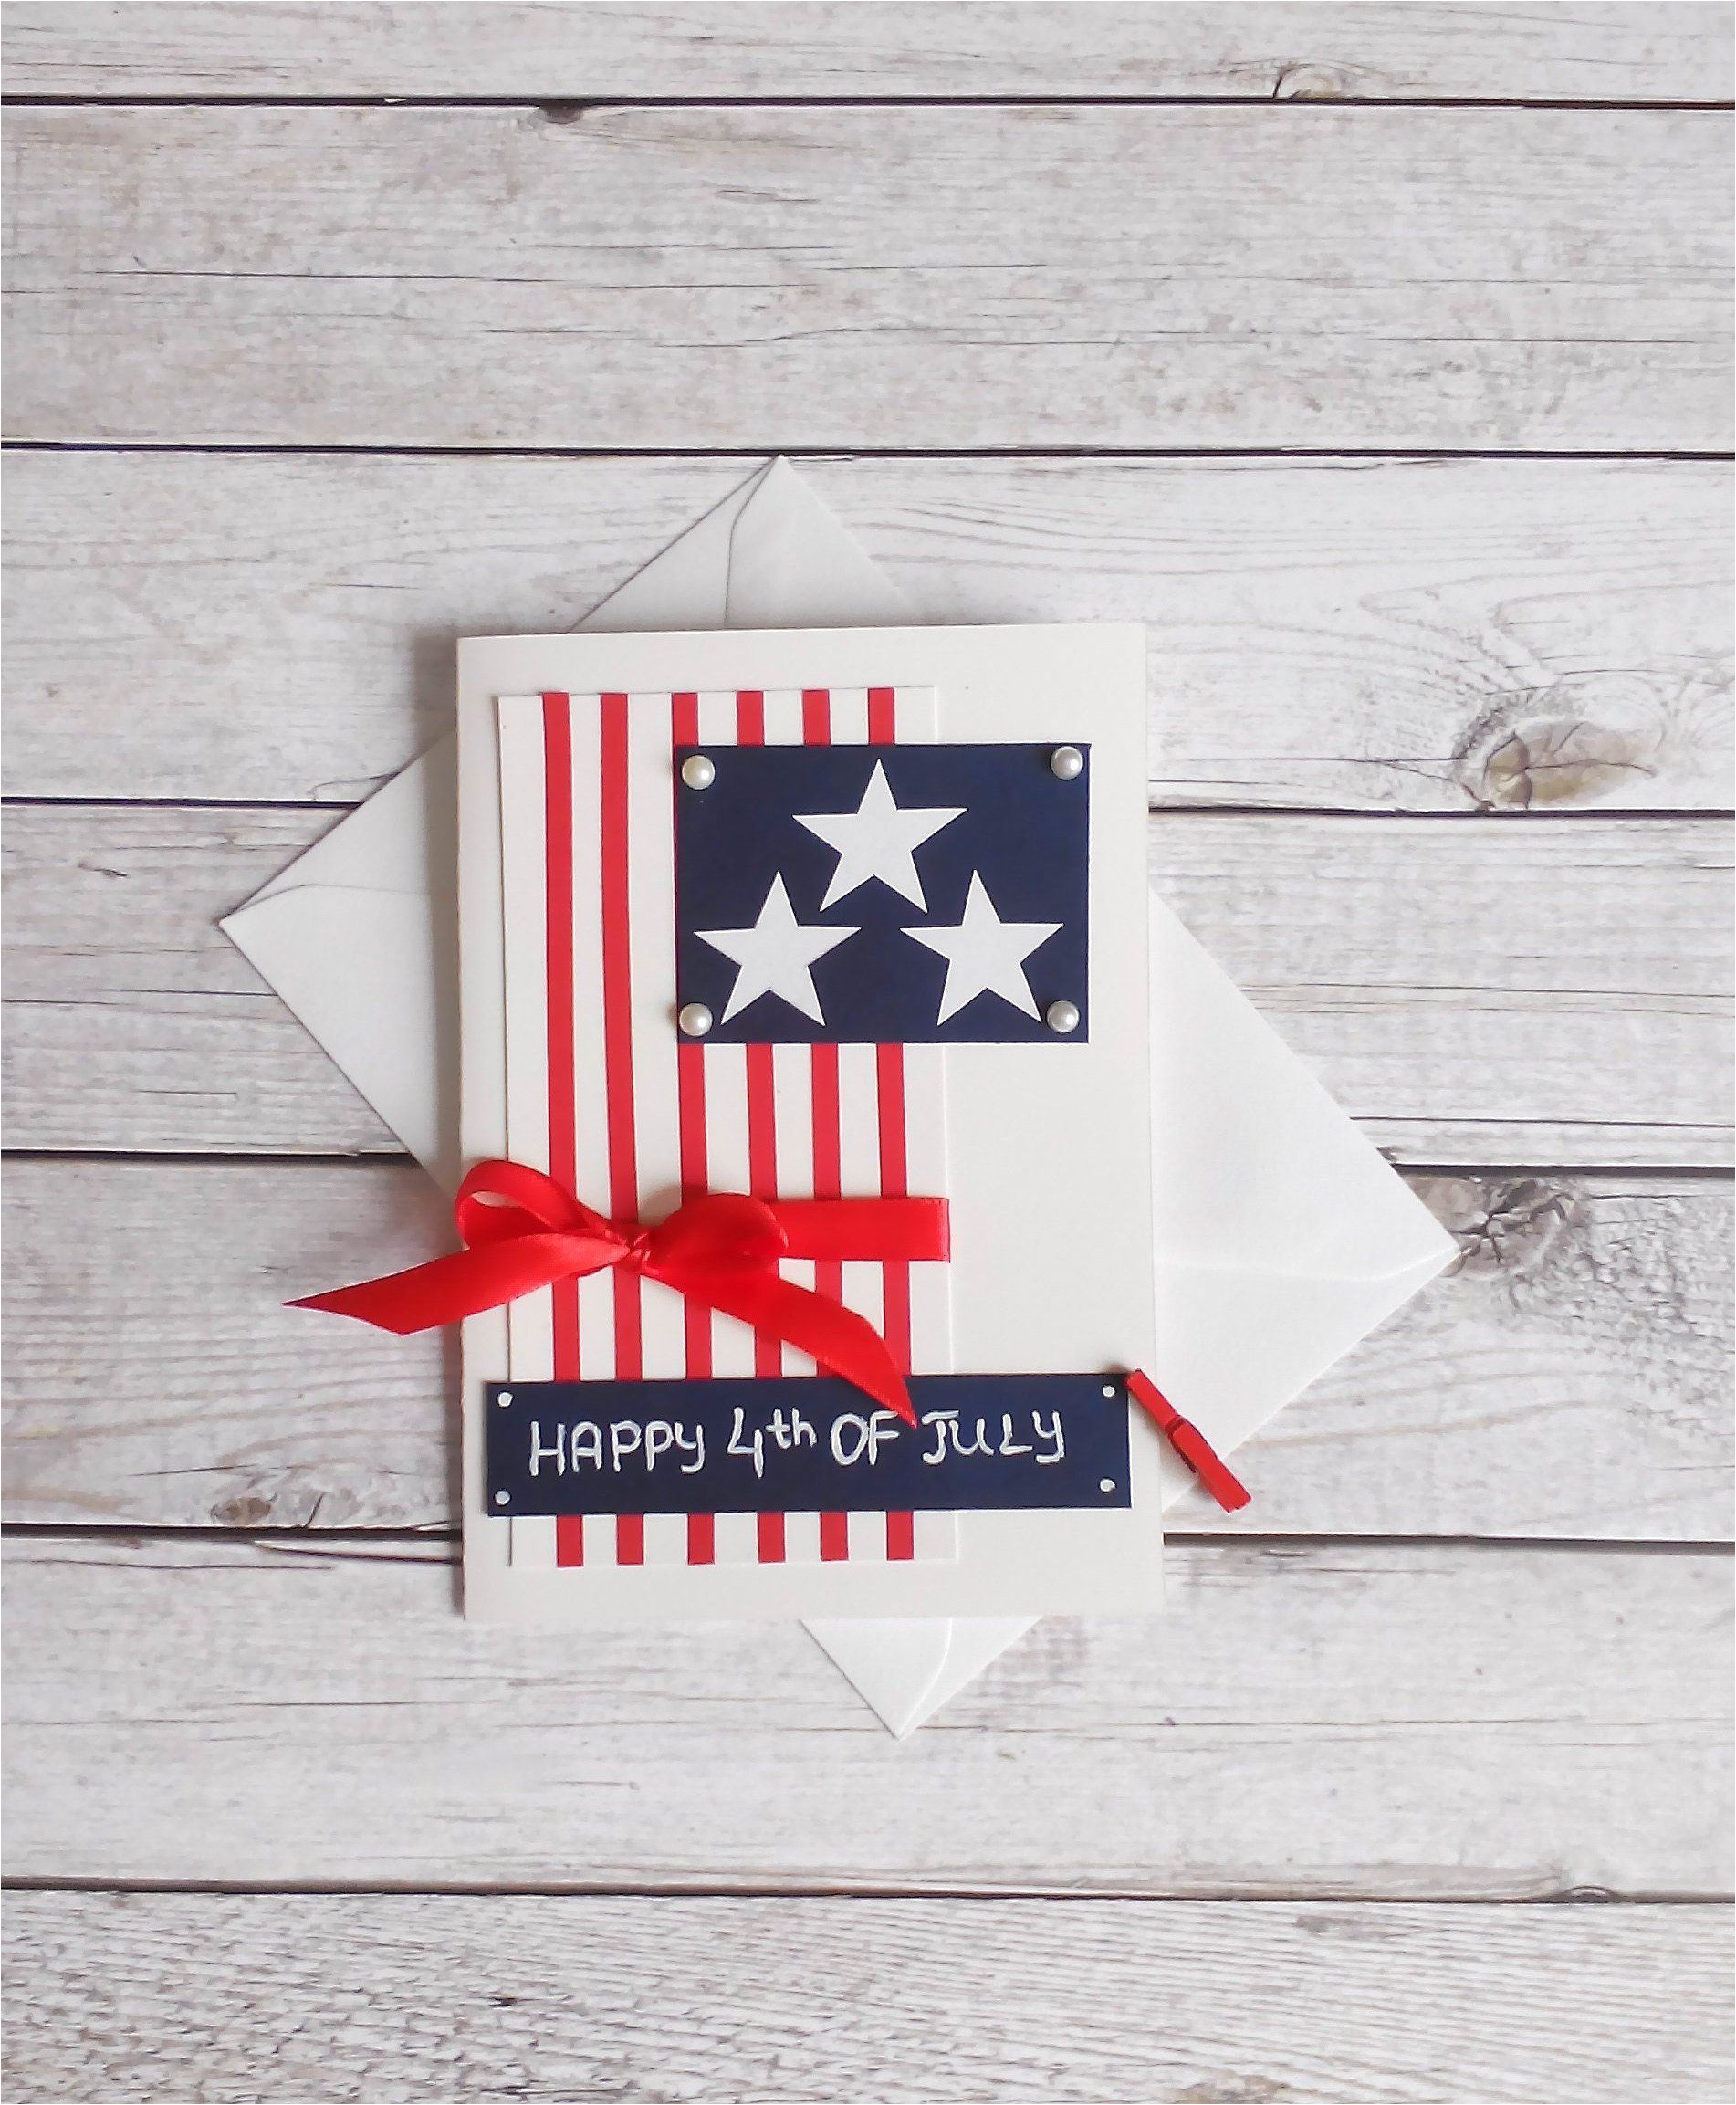 4th Of July Handmade Card Ideas 33 Best Handmade Cards Images In 2020 Cards Cards